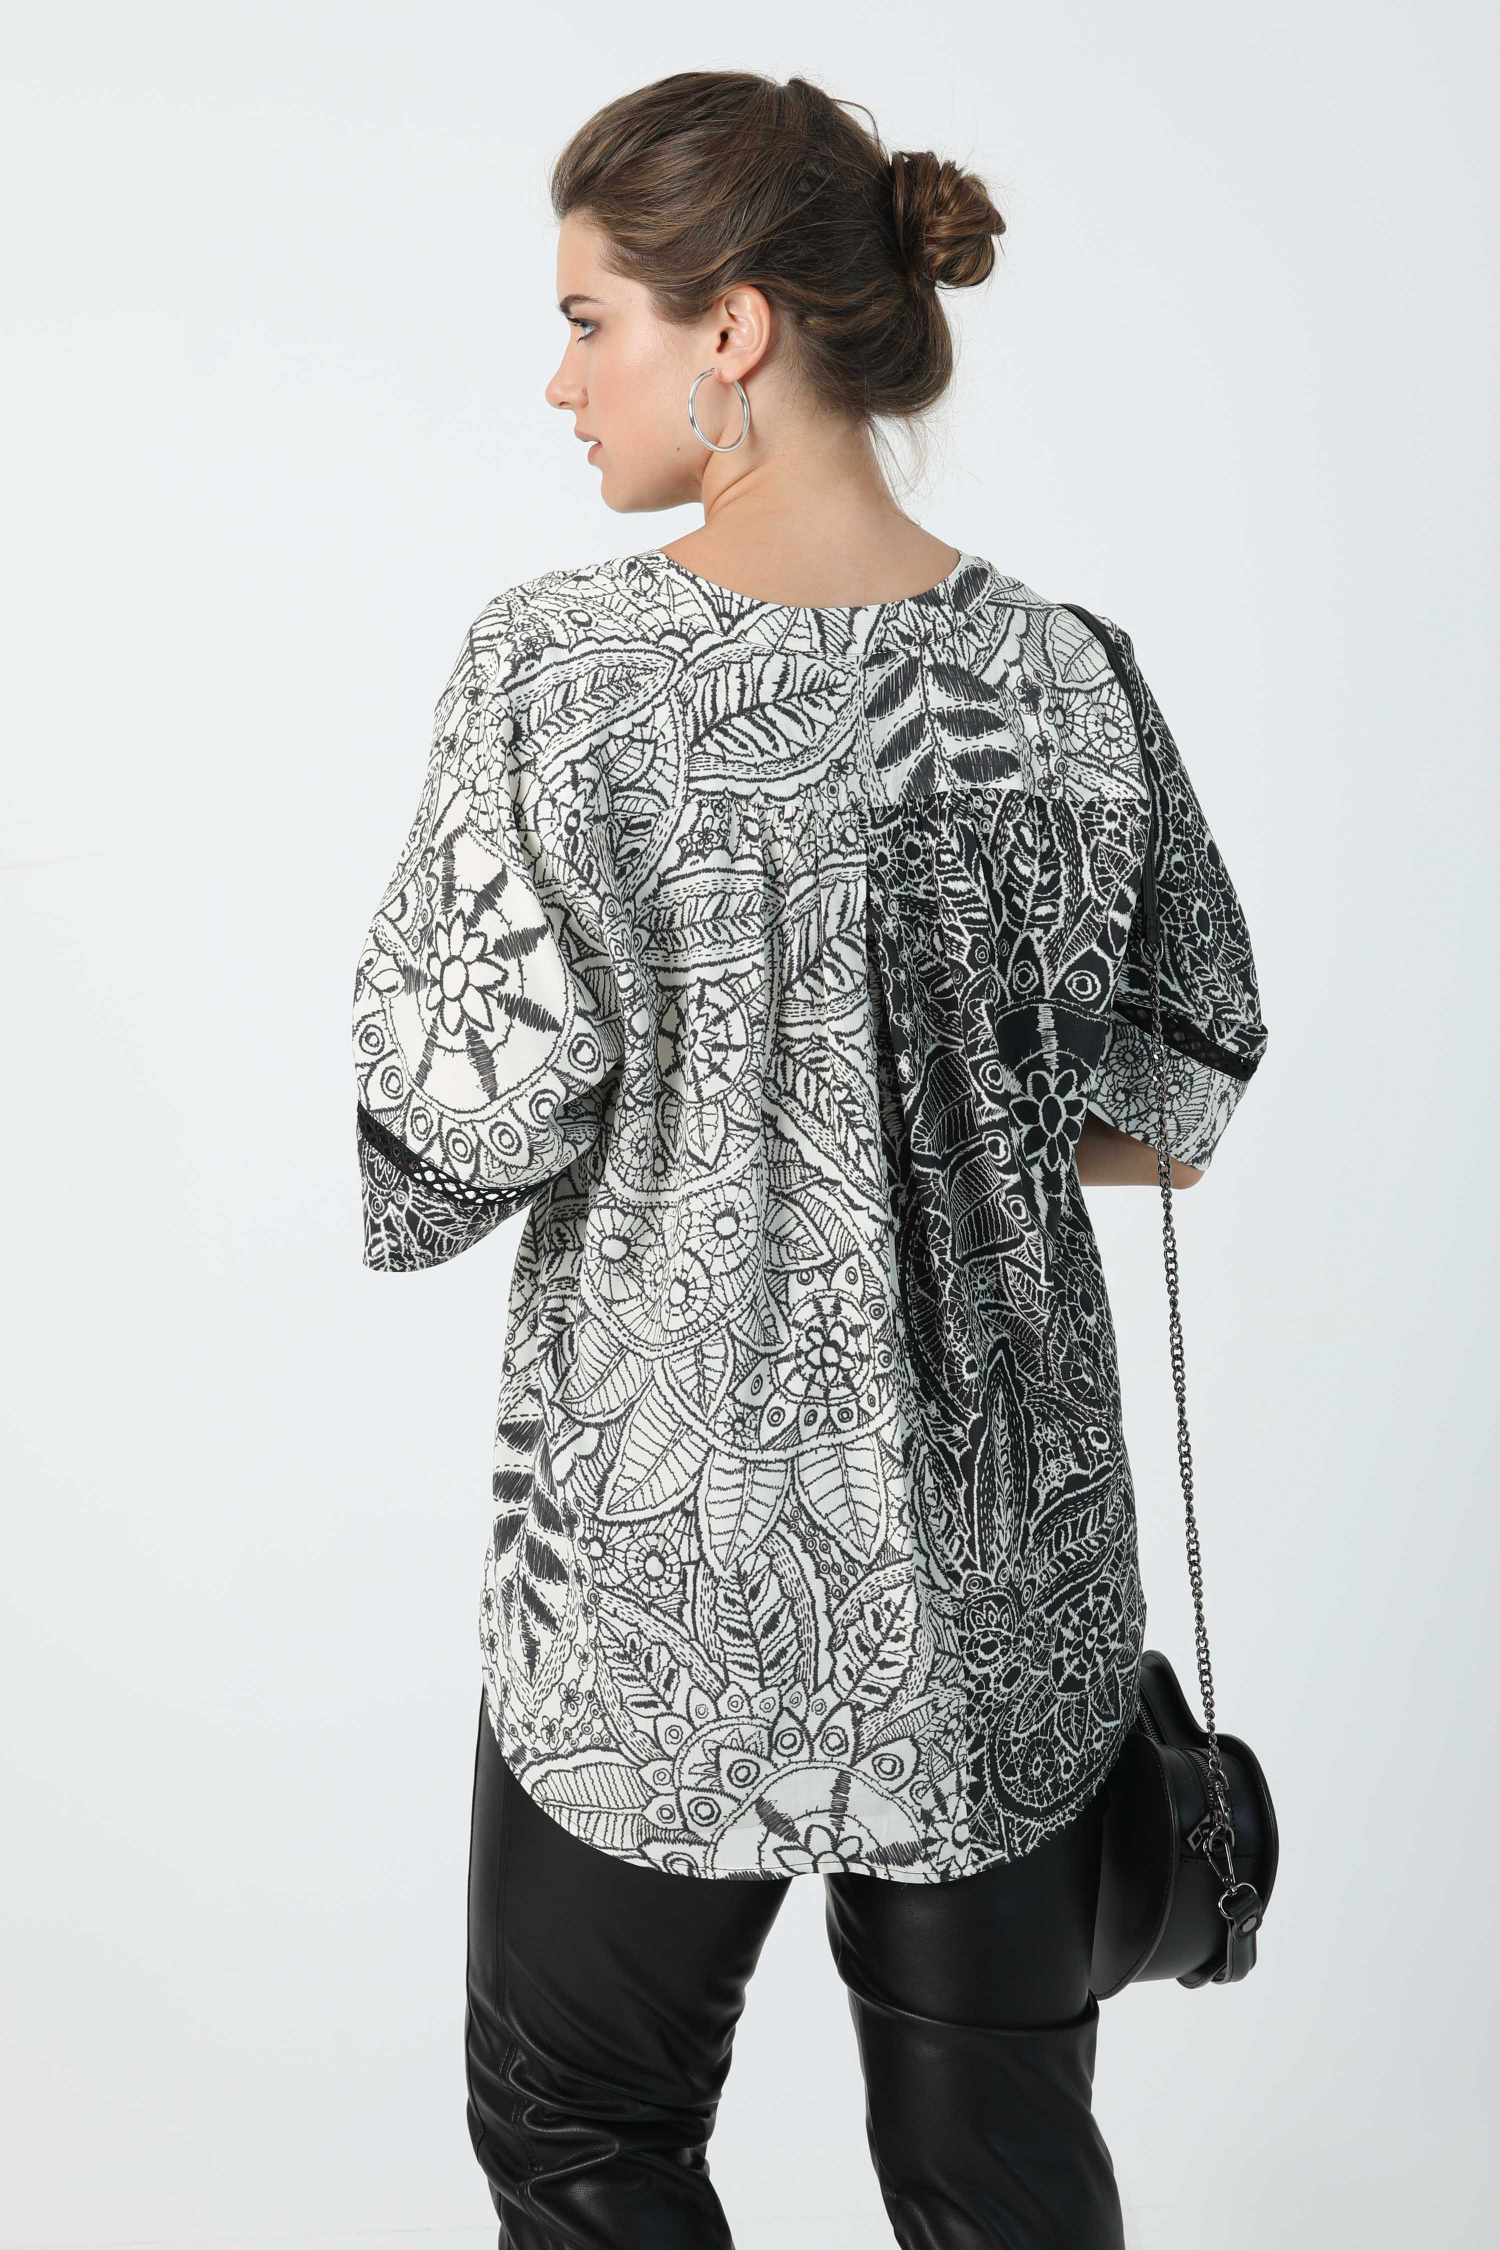 Black and white floral print blouse in oeko-tex fabric